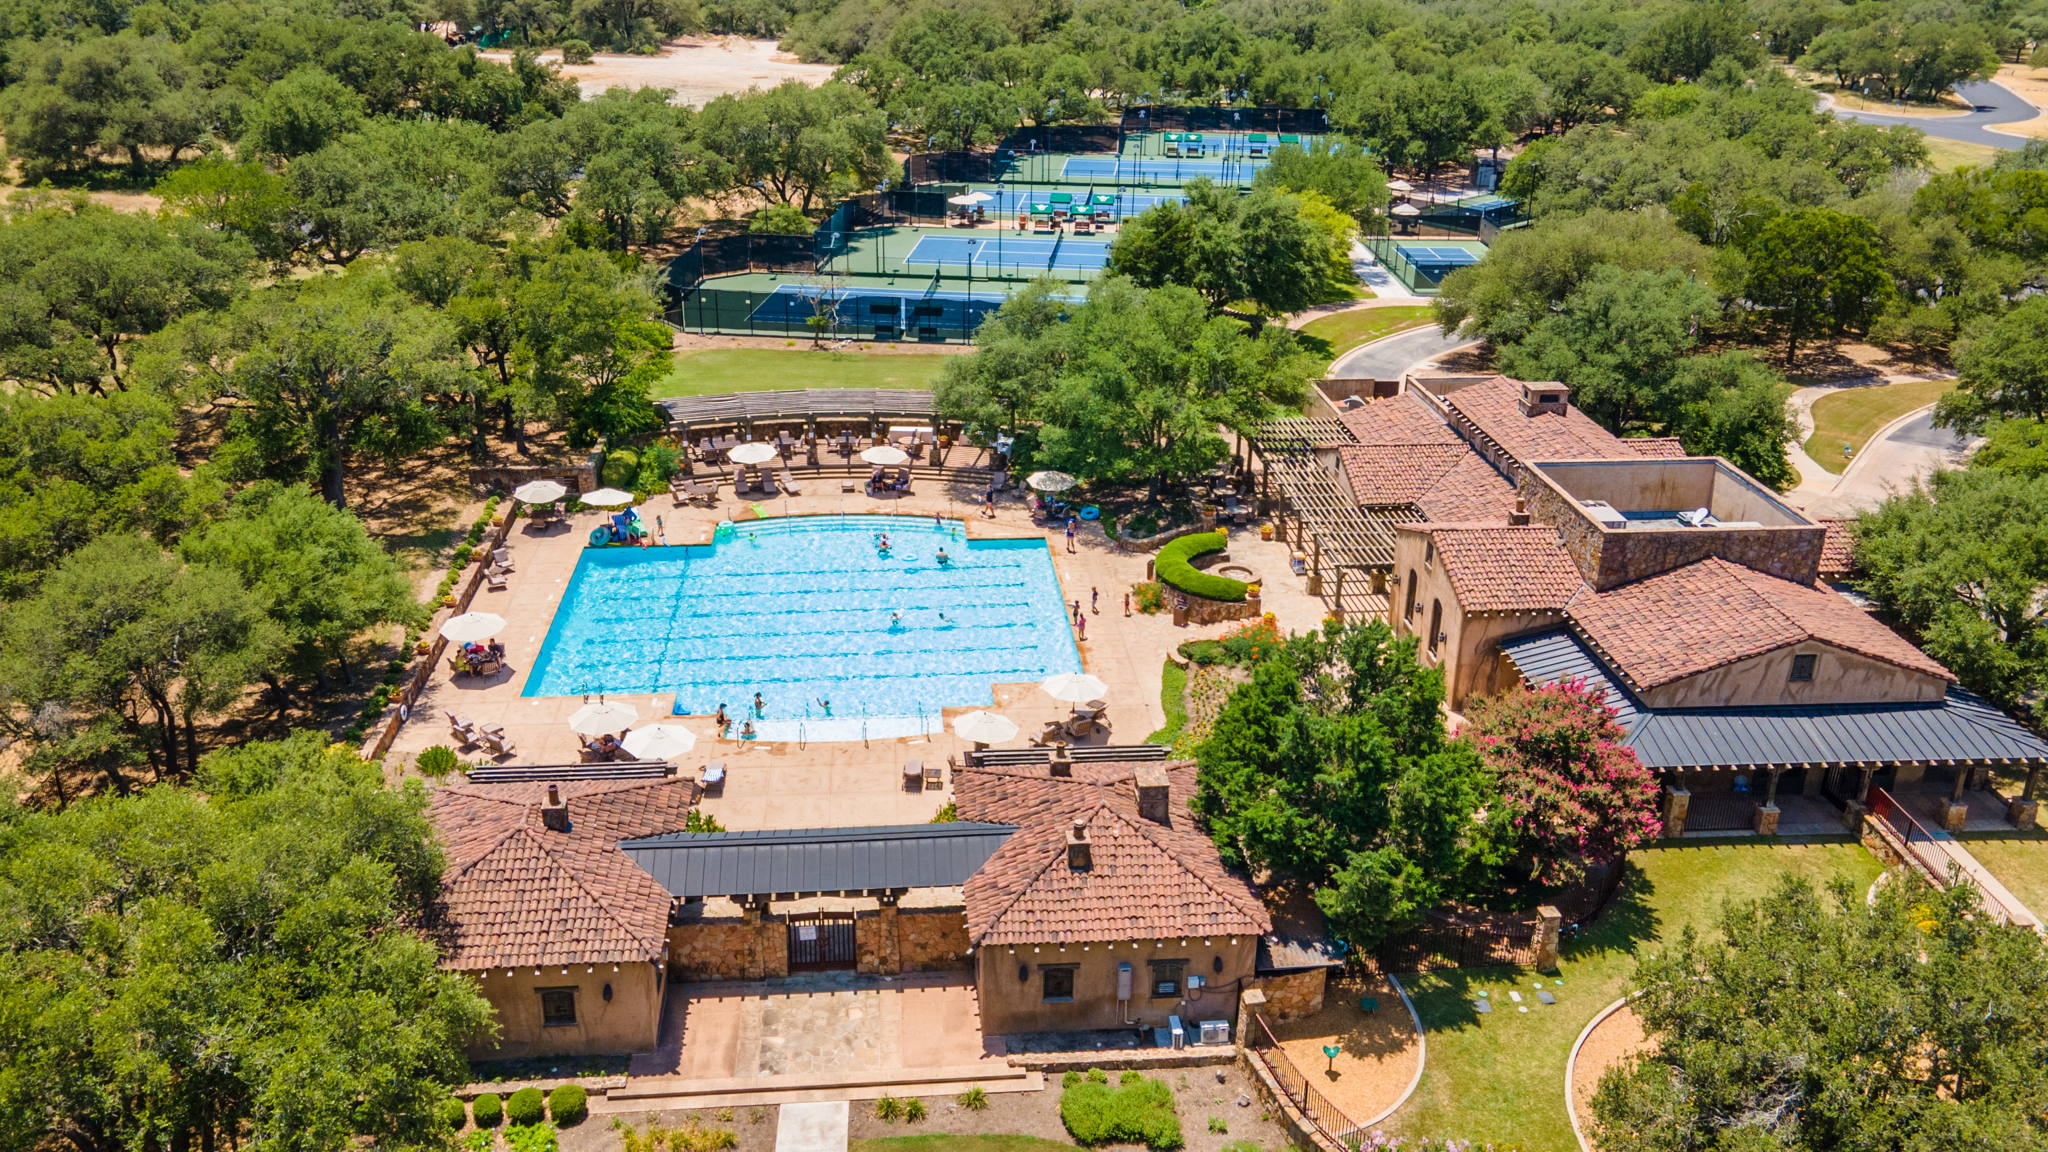 Tennis Court and Pool Aerial View